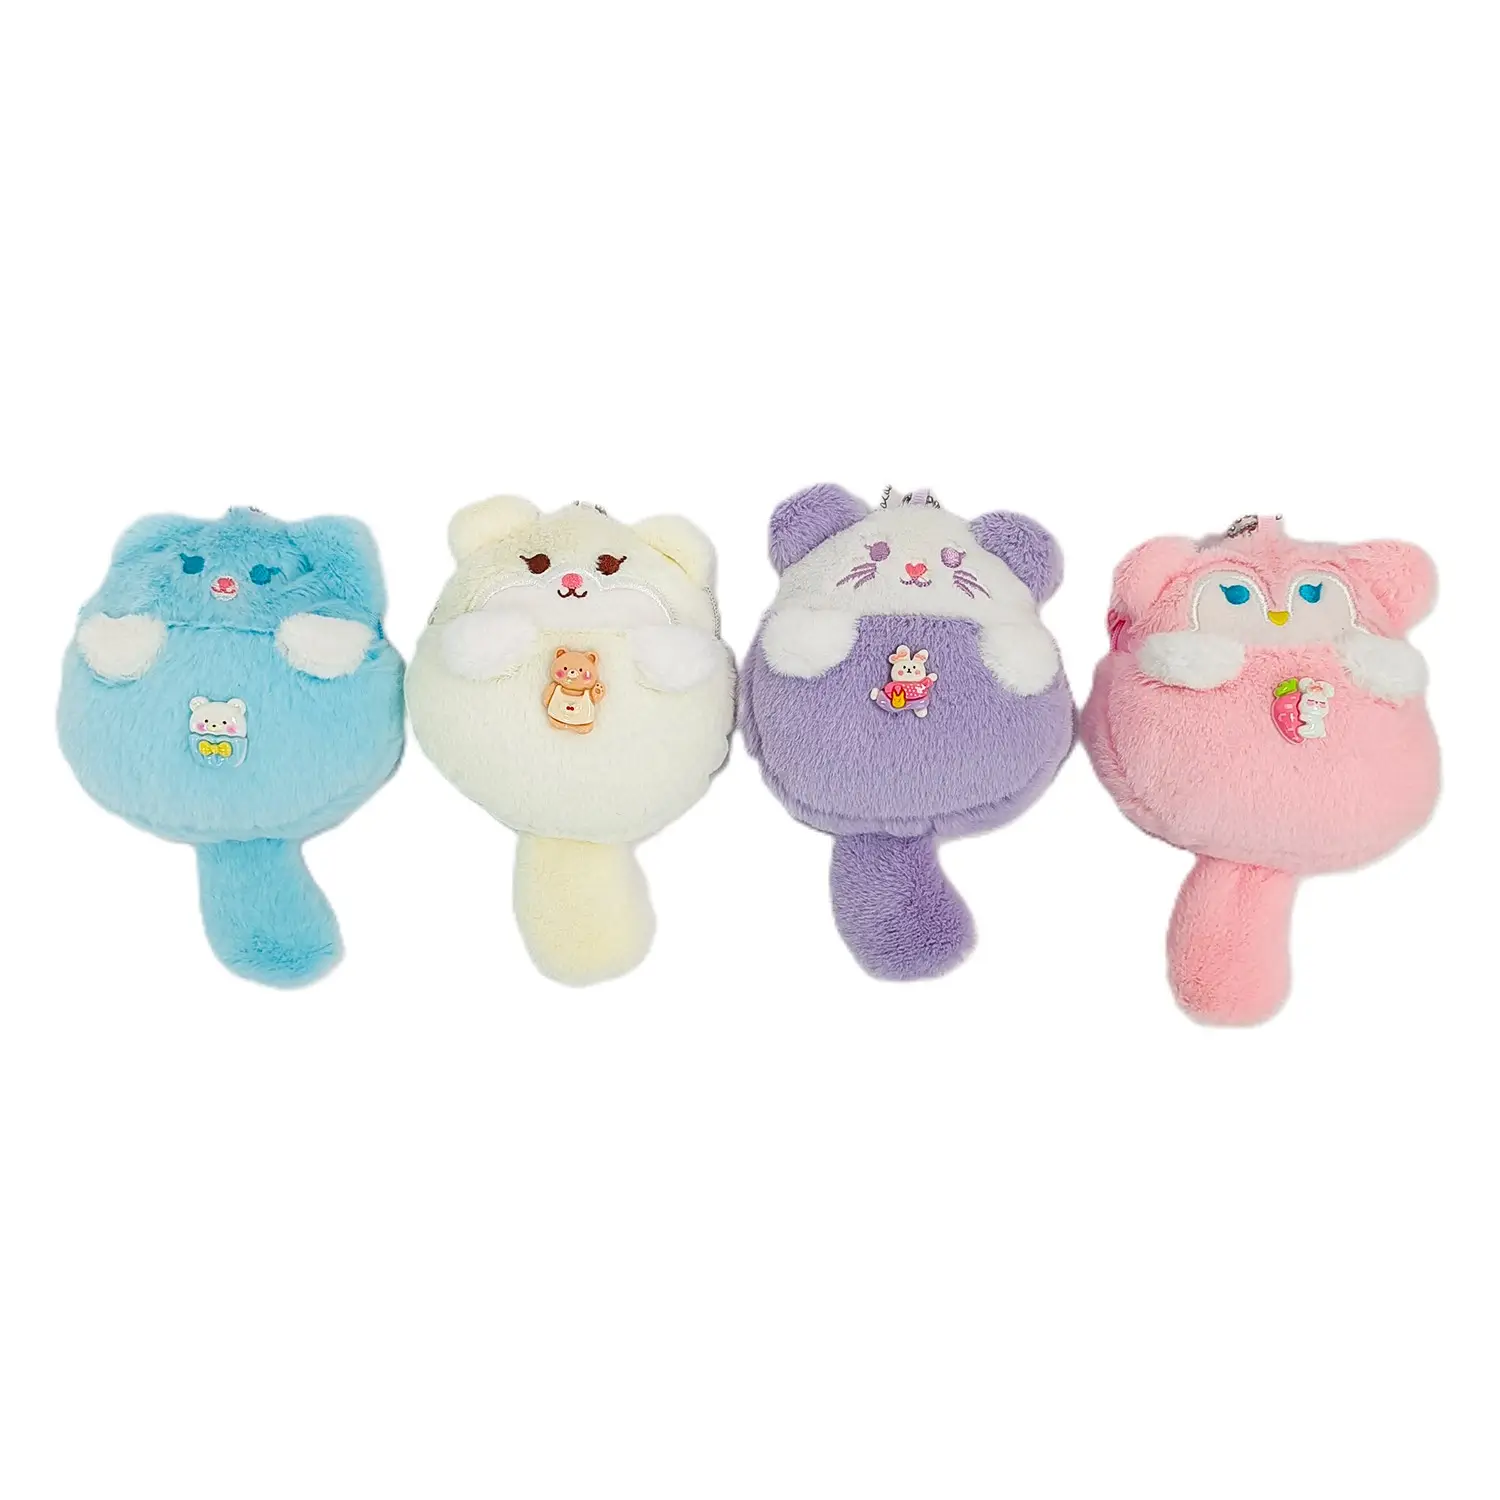 A07569 13cm Animal Big Tail Coin Purse Plush Animal Wallet Plush Pendant Gifts For Girls